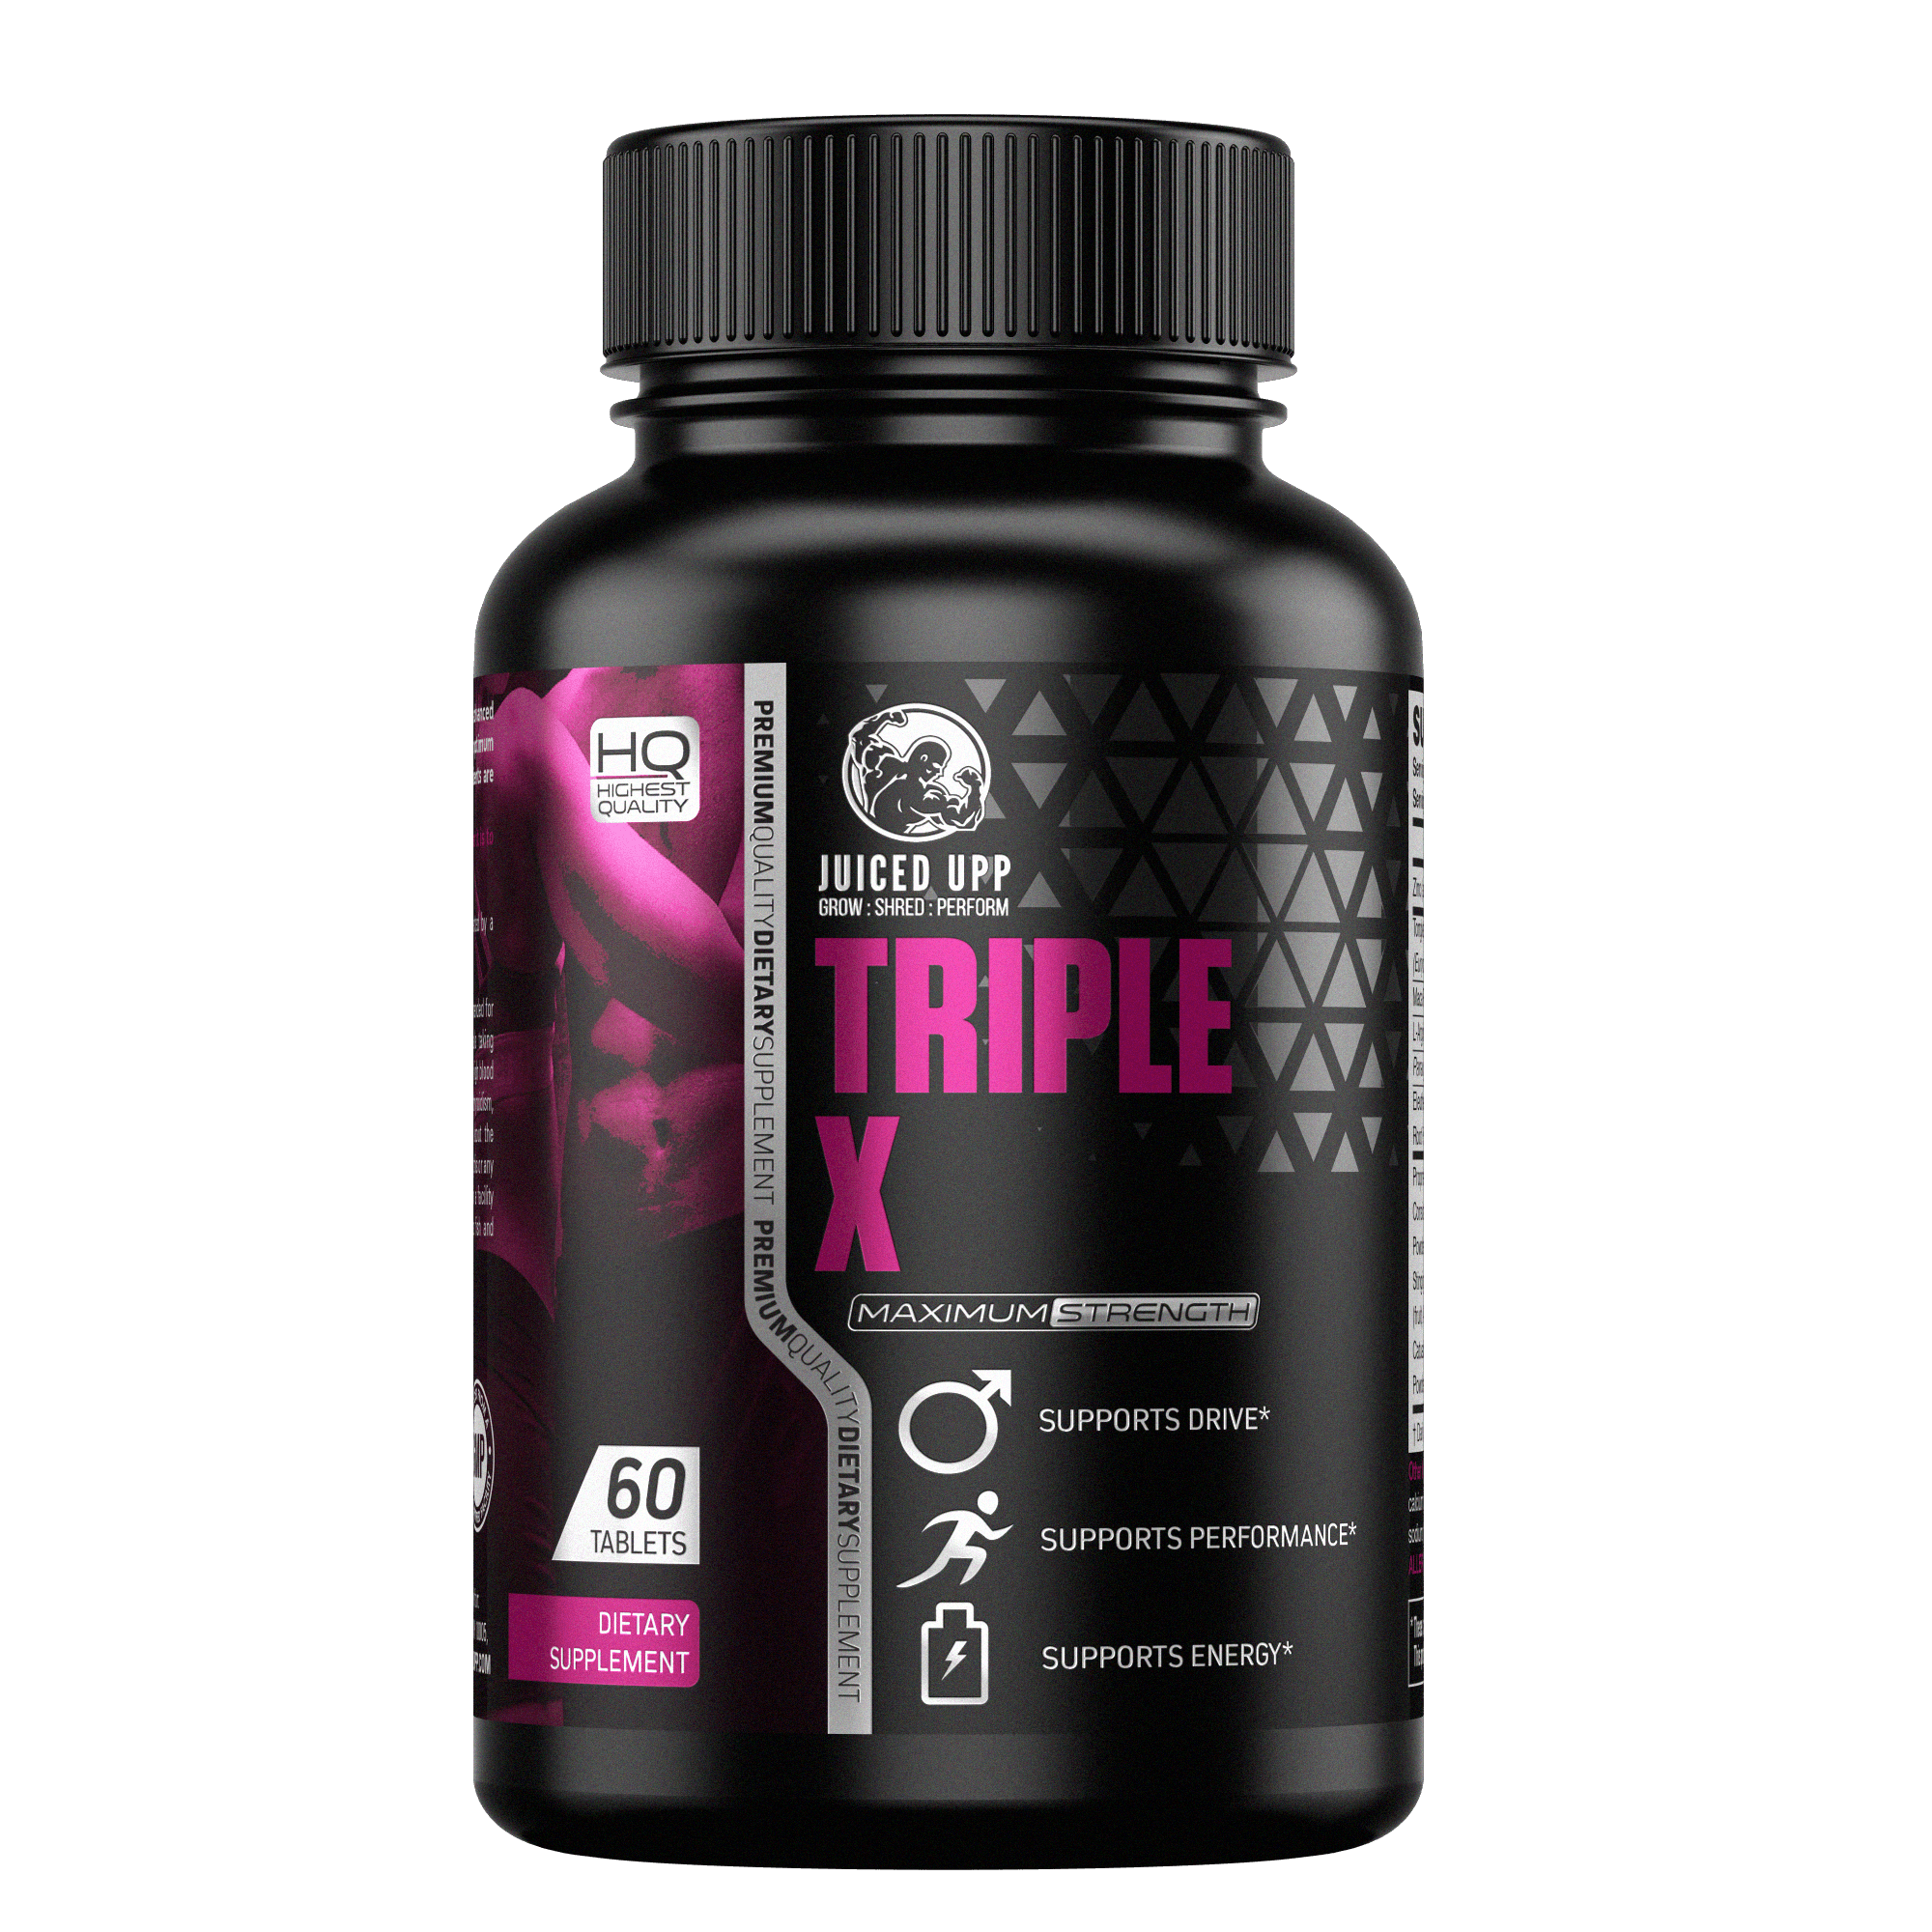 TRIPLE X - Juiced Upp - 100% Natural Fitness and Wellbeing Supplements